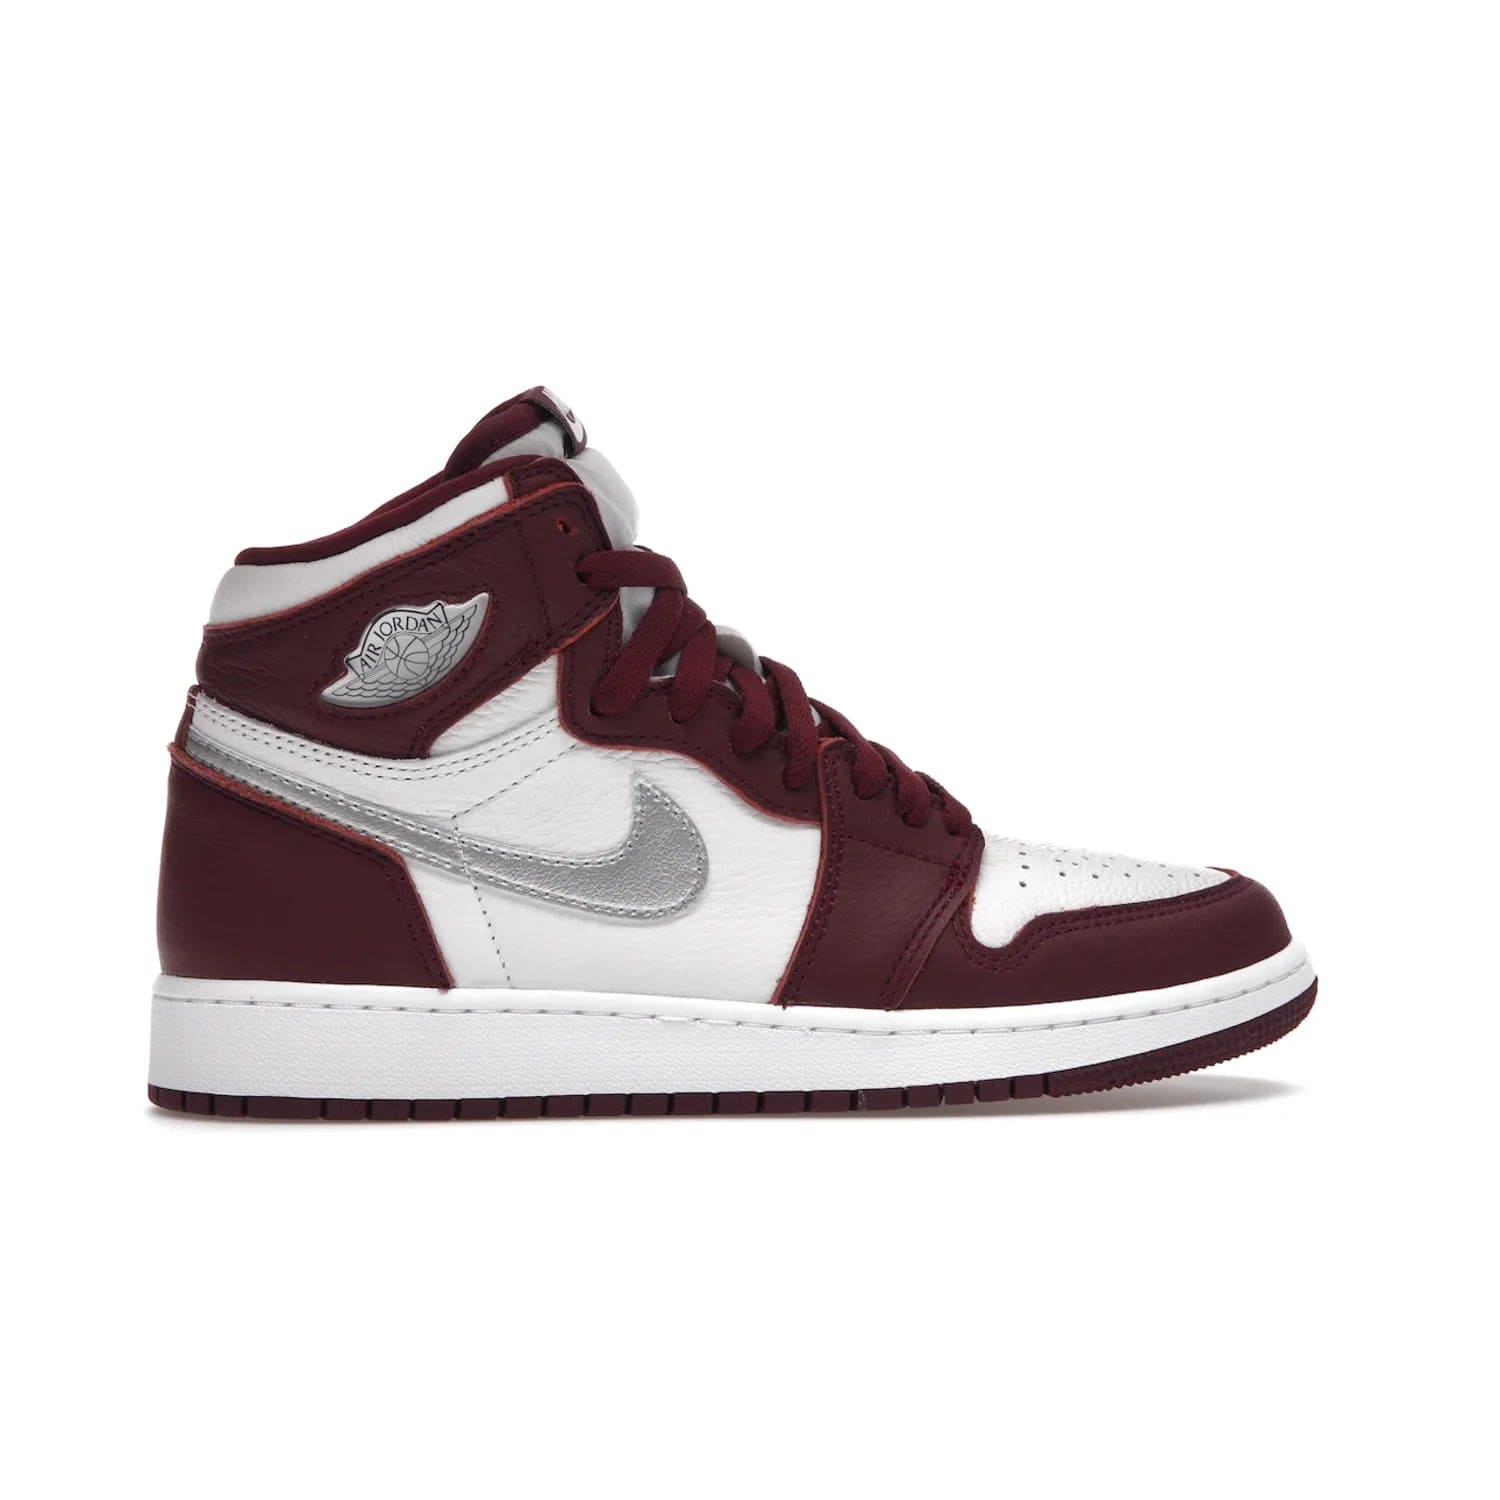 Jordan 1 Retro High OG Bordeaux (GS) - Image 36 - Only at www.BallersClubKickz.com - #
Introducing the Air Jordan 1 Retro High OG Bordeaux GS – a signature colorway part of the Jordan Brand Fall 2021 lineup. White leather upper & Bordeaux overlays, metallic silver swoosh, jeweled Air Jordan Wings logo & more. Step up your style game with this sleek fall season silhouette.